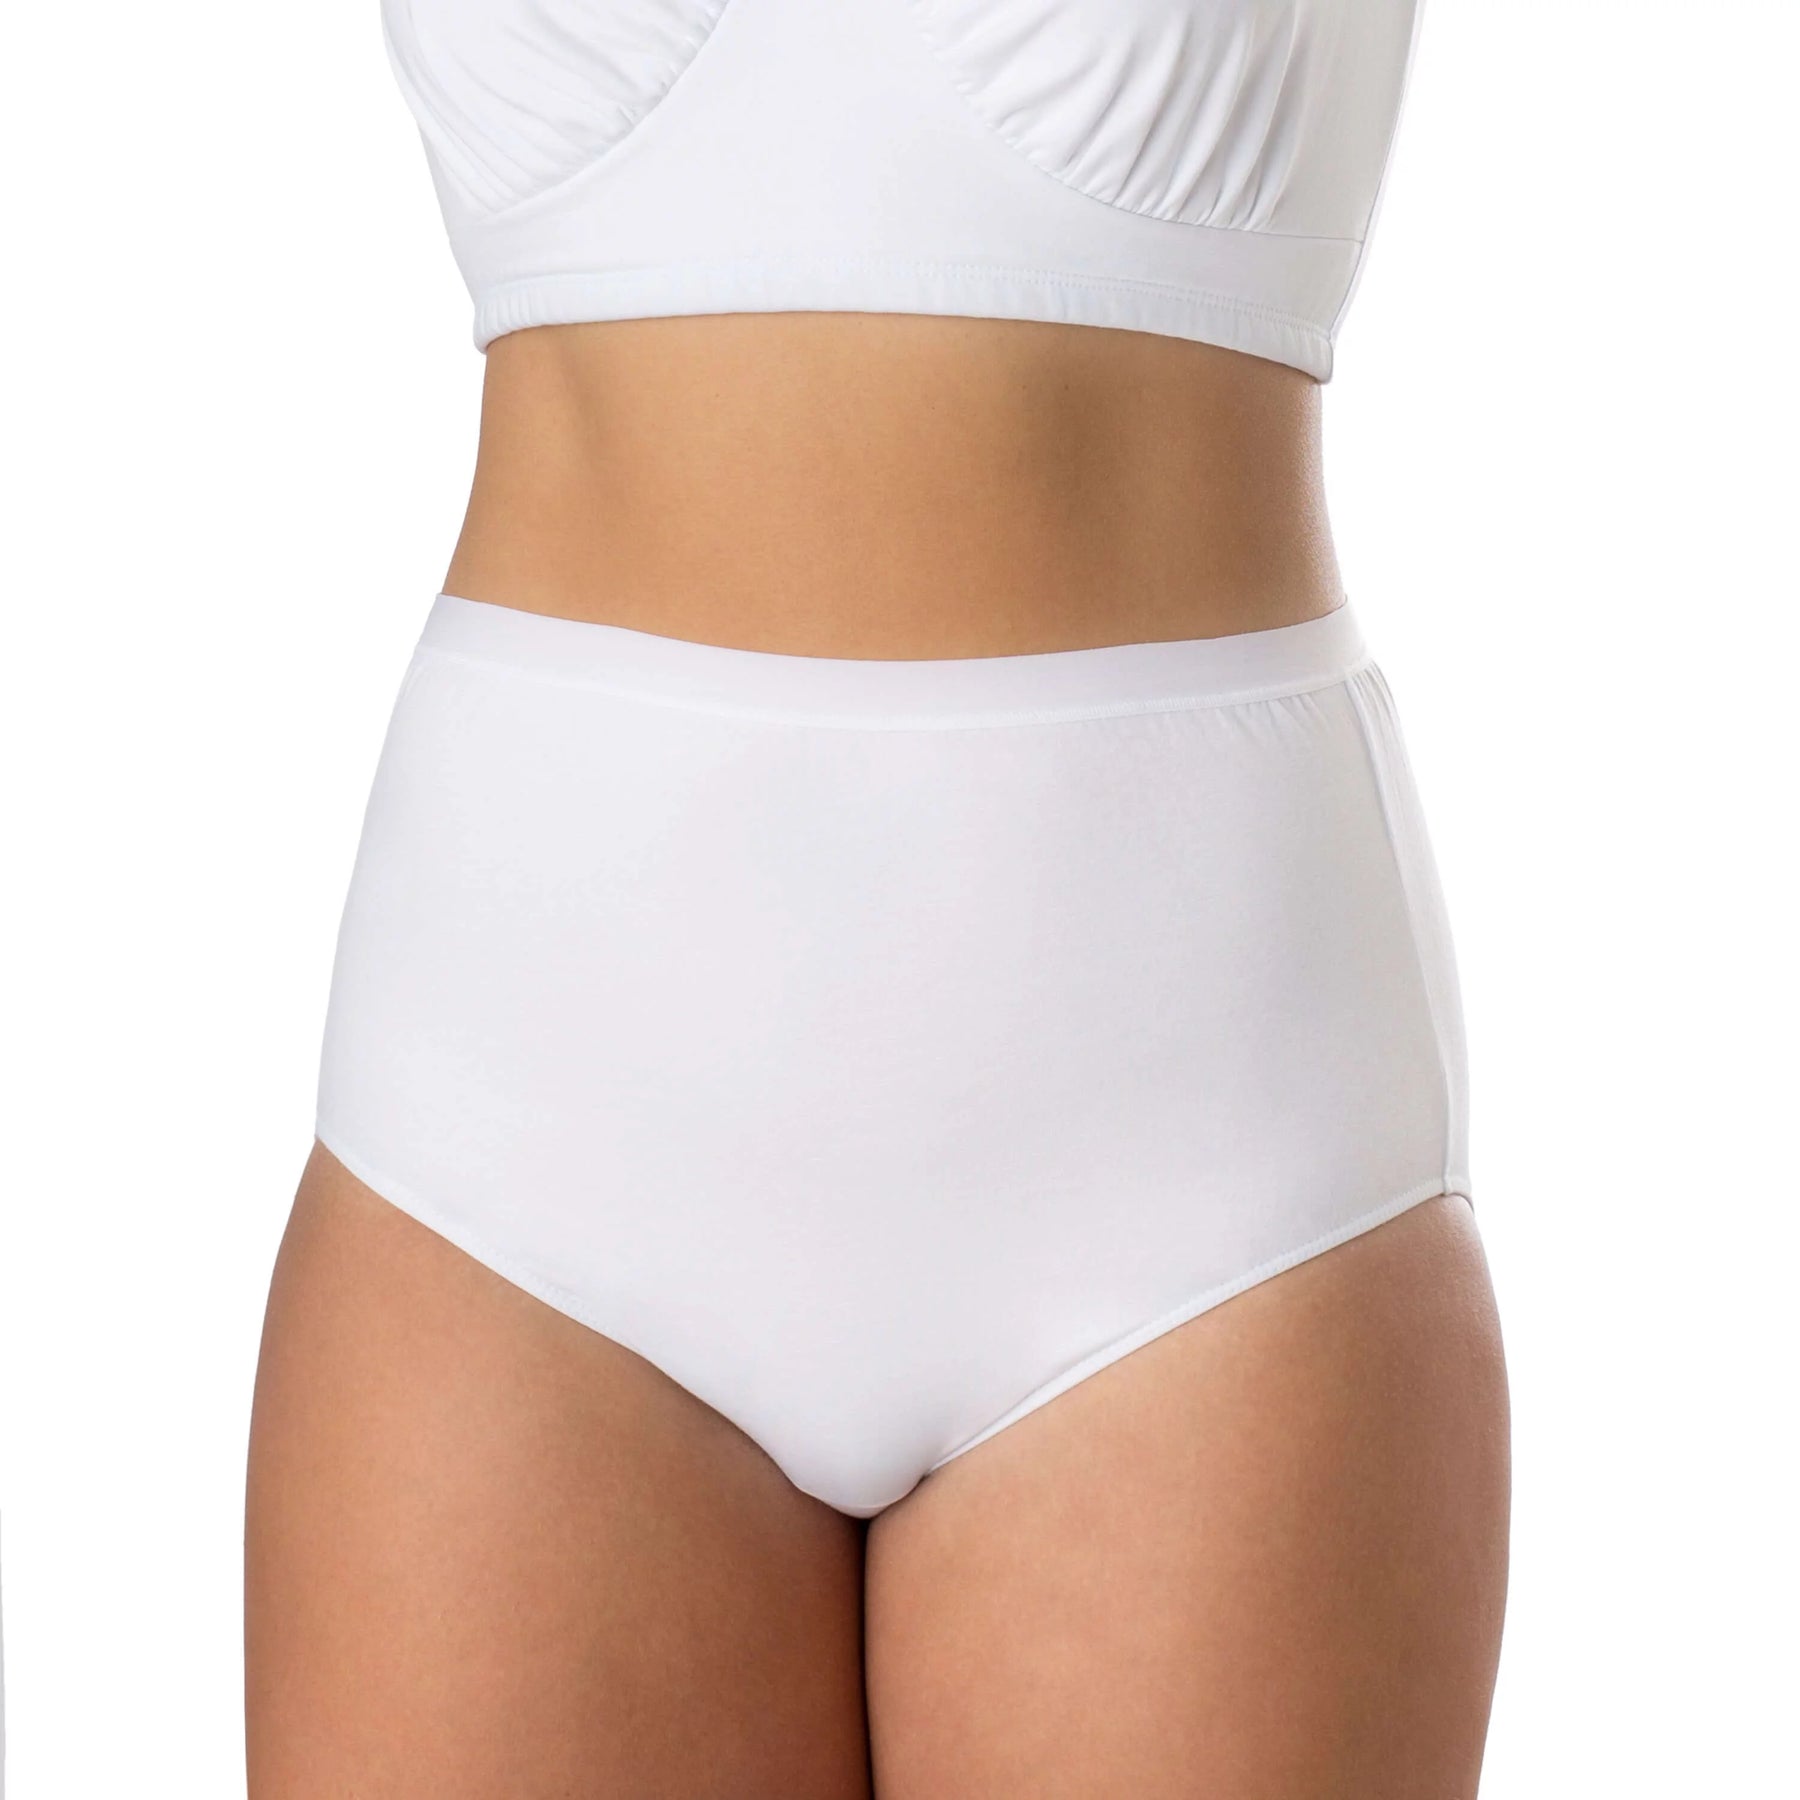 Foxique Jumbo Cotton Panties for Women, Big Size High Waist Panty with  Full Coverage